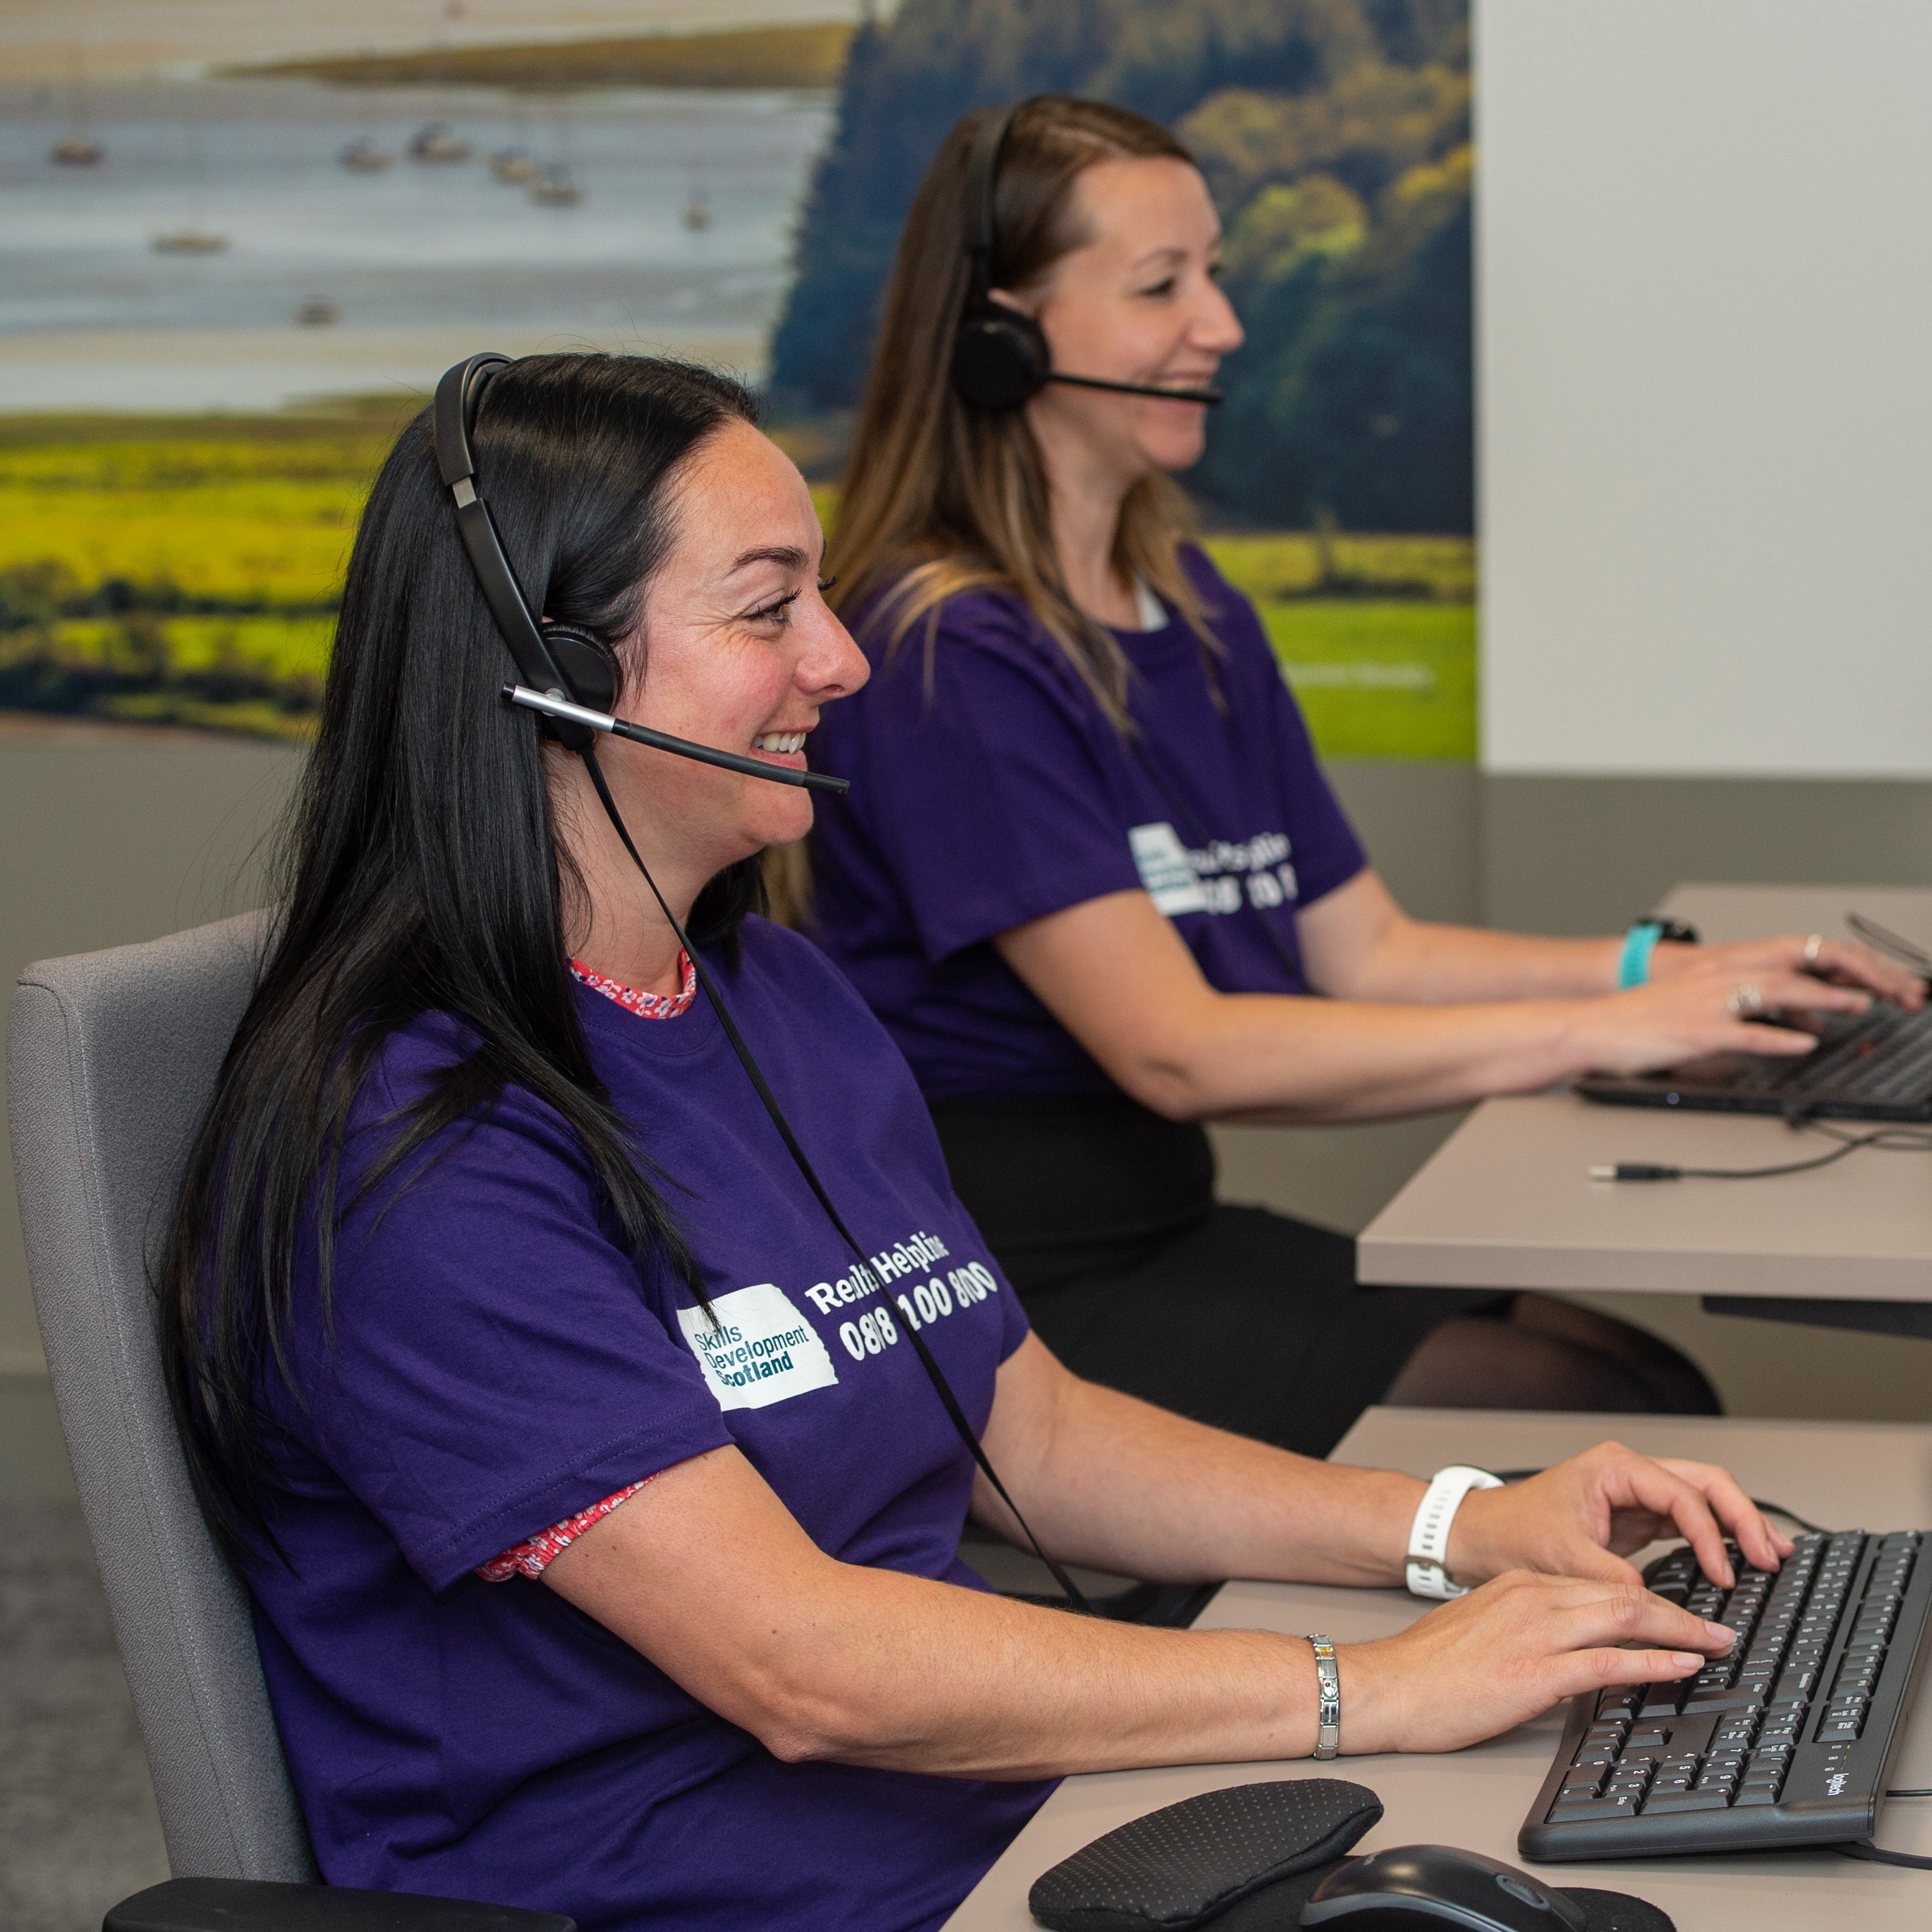 Two smiling people wear purple t-shirts and headsets while typing at keyboards